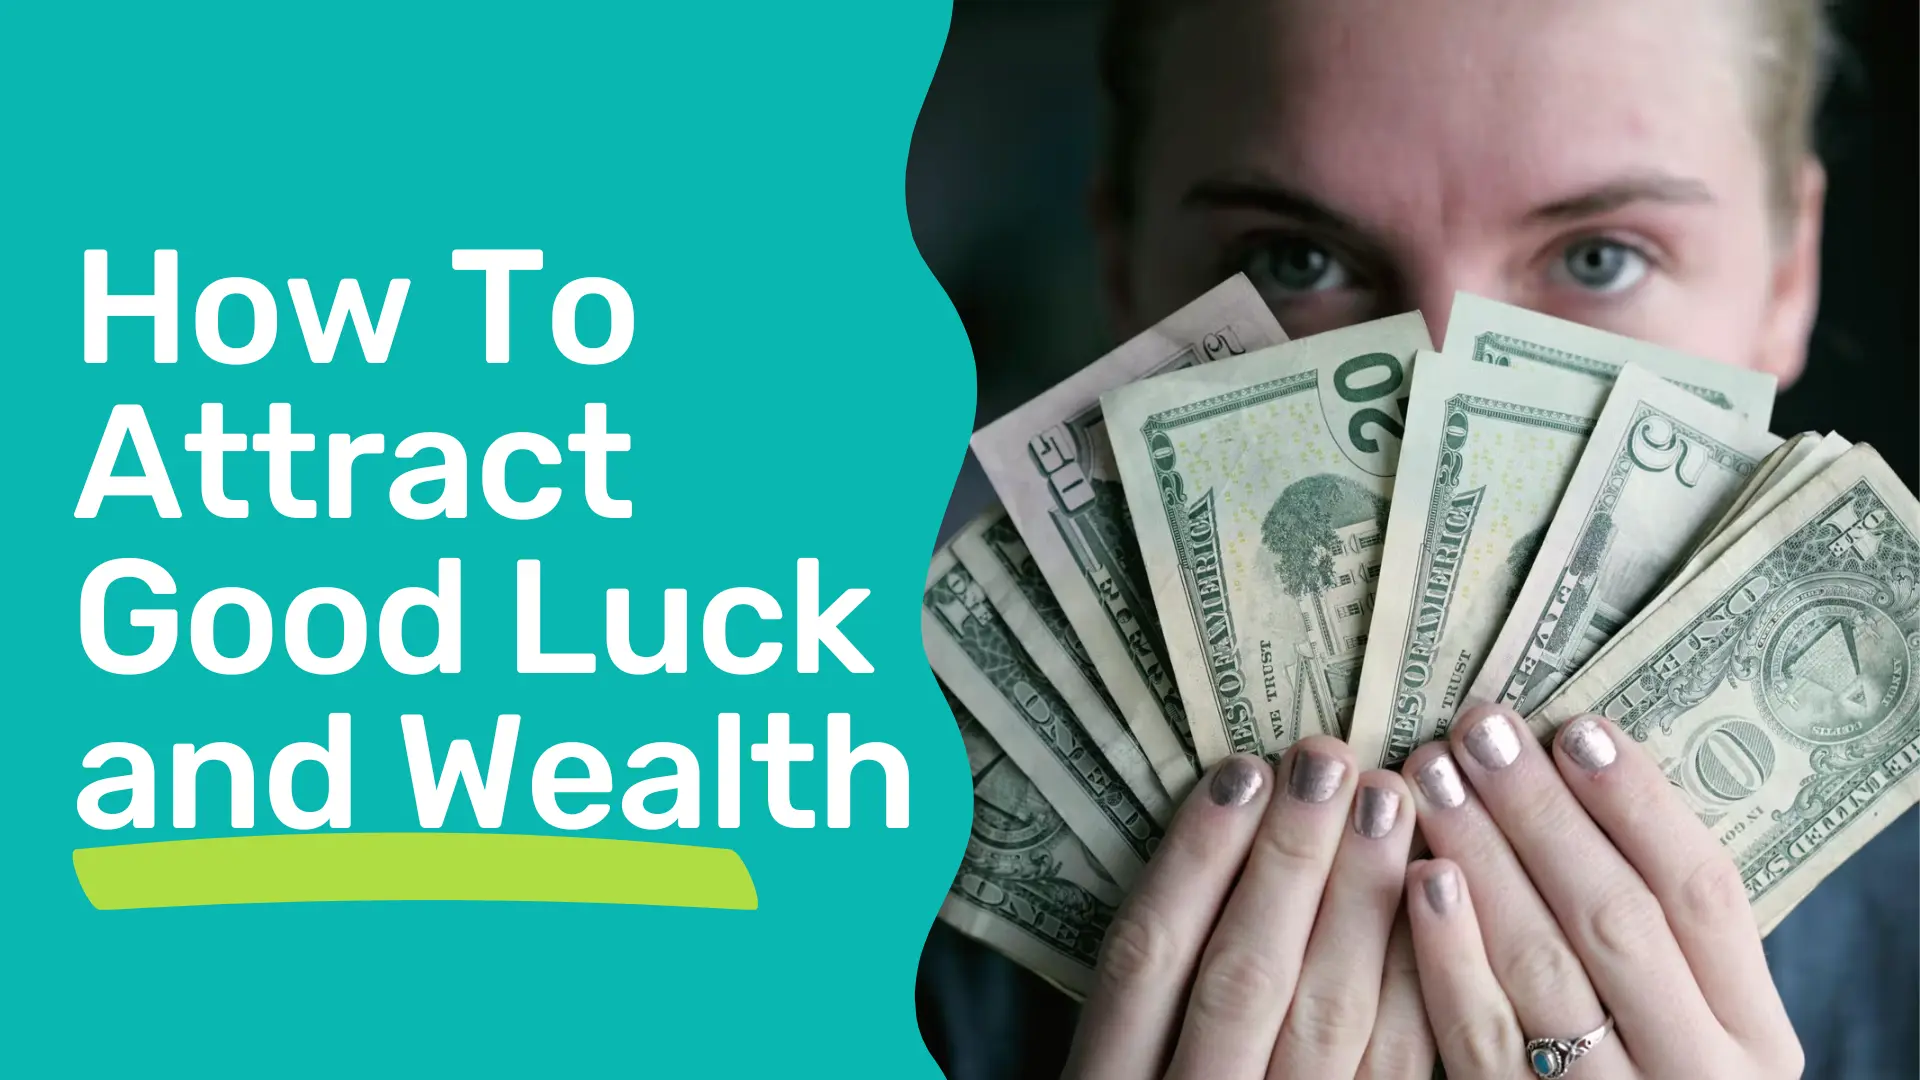 How To Attract Good Luck and Wealth